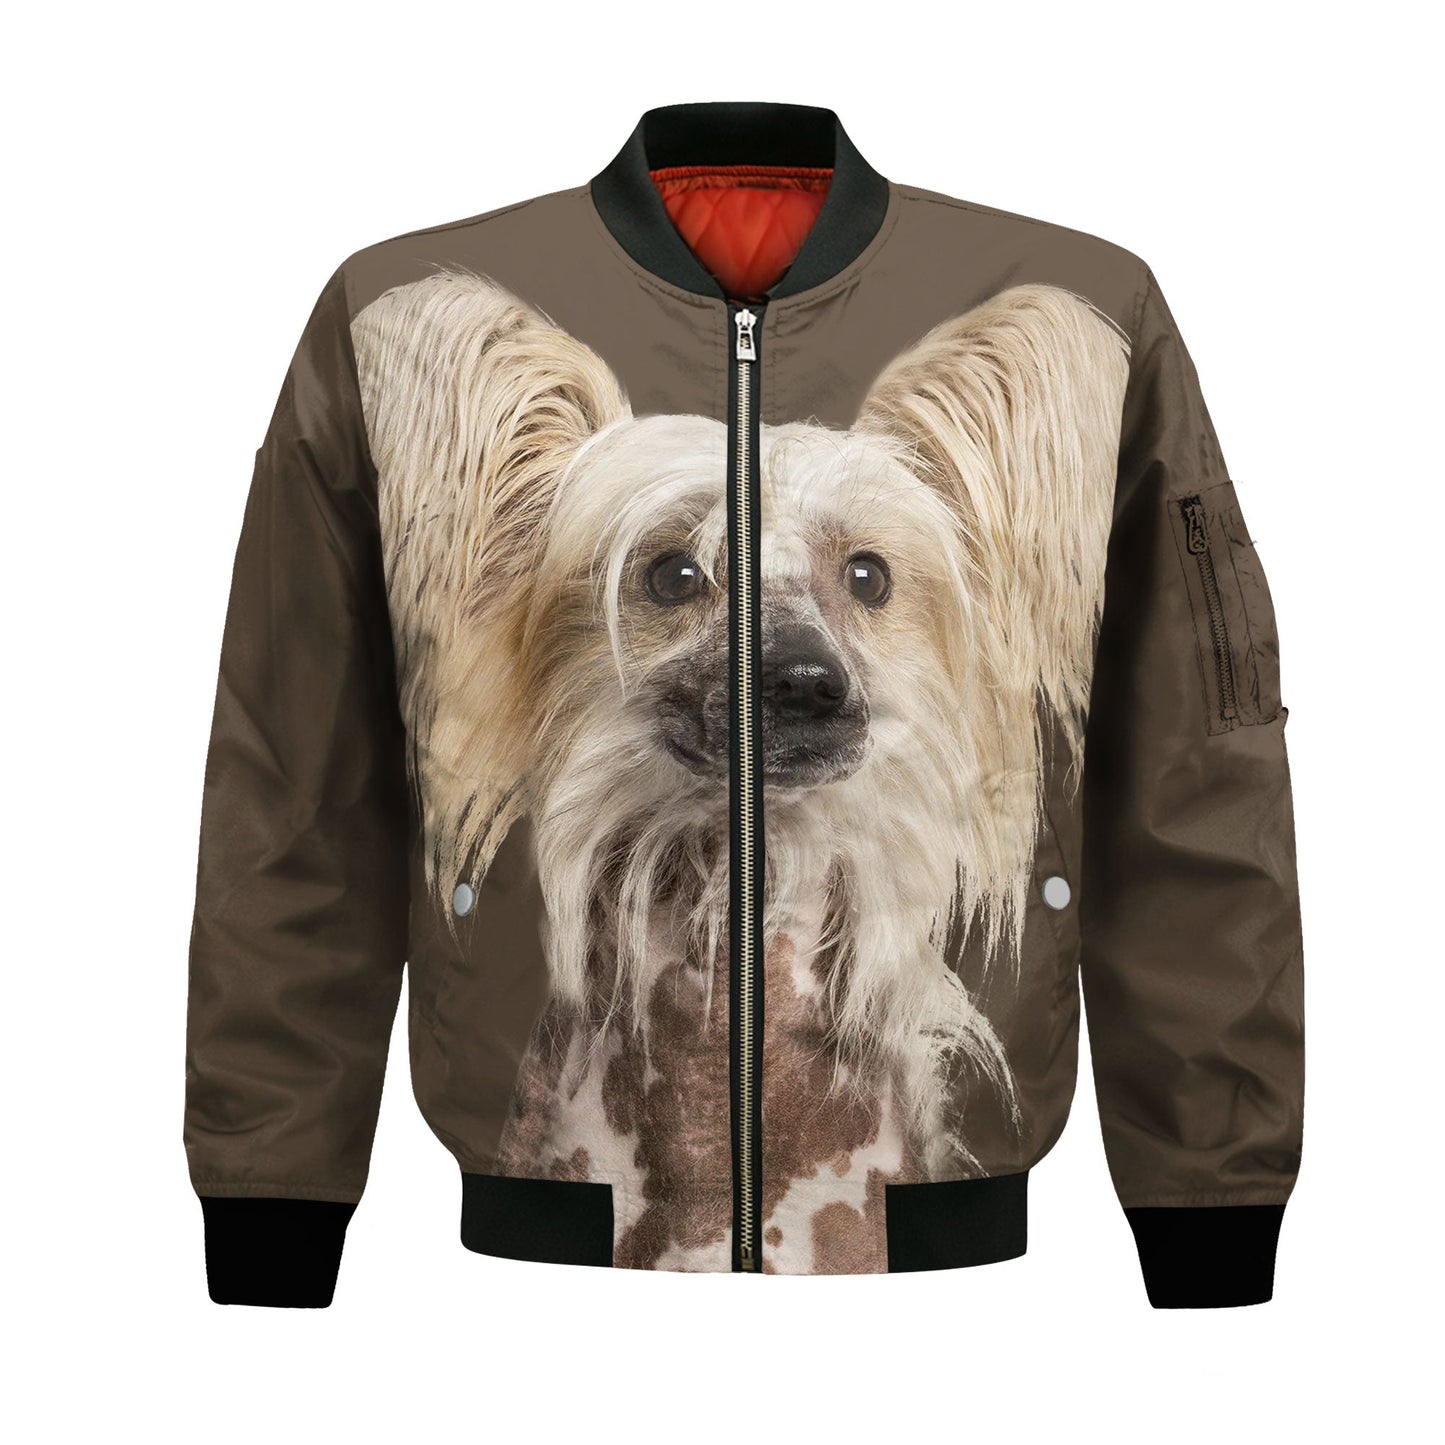 Chinese Crested - Unisex 3D Graphic Bomber Jacket